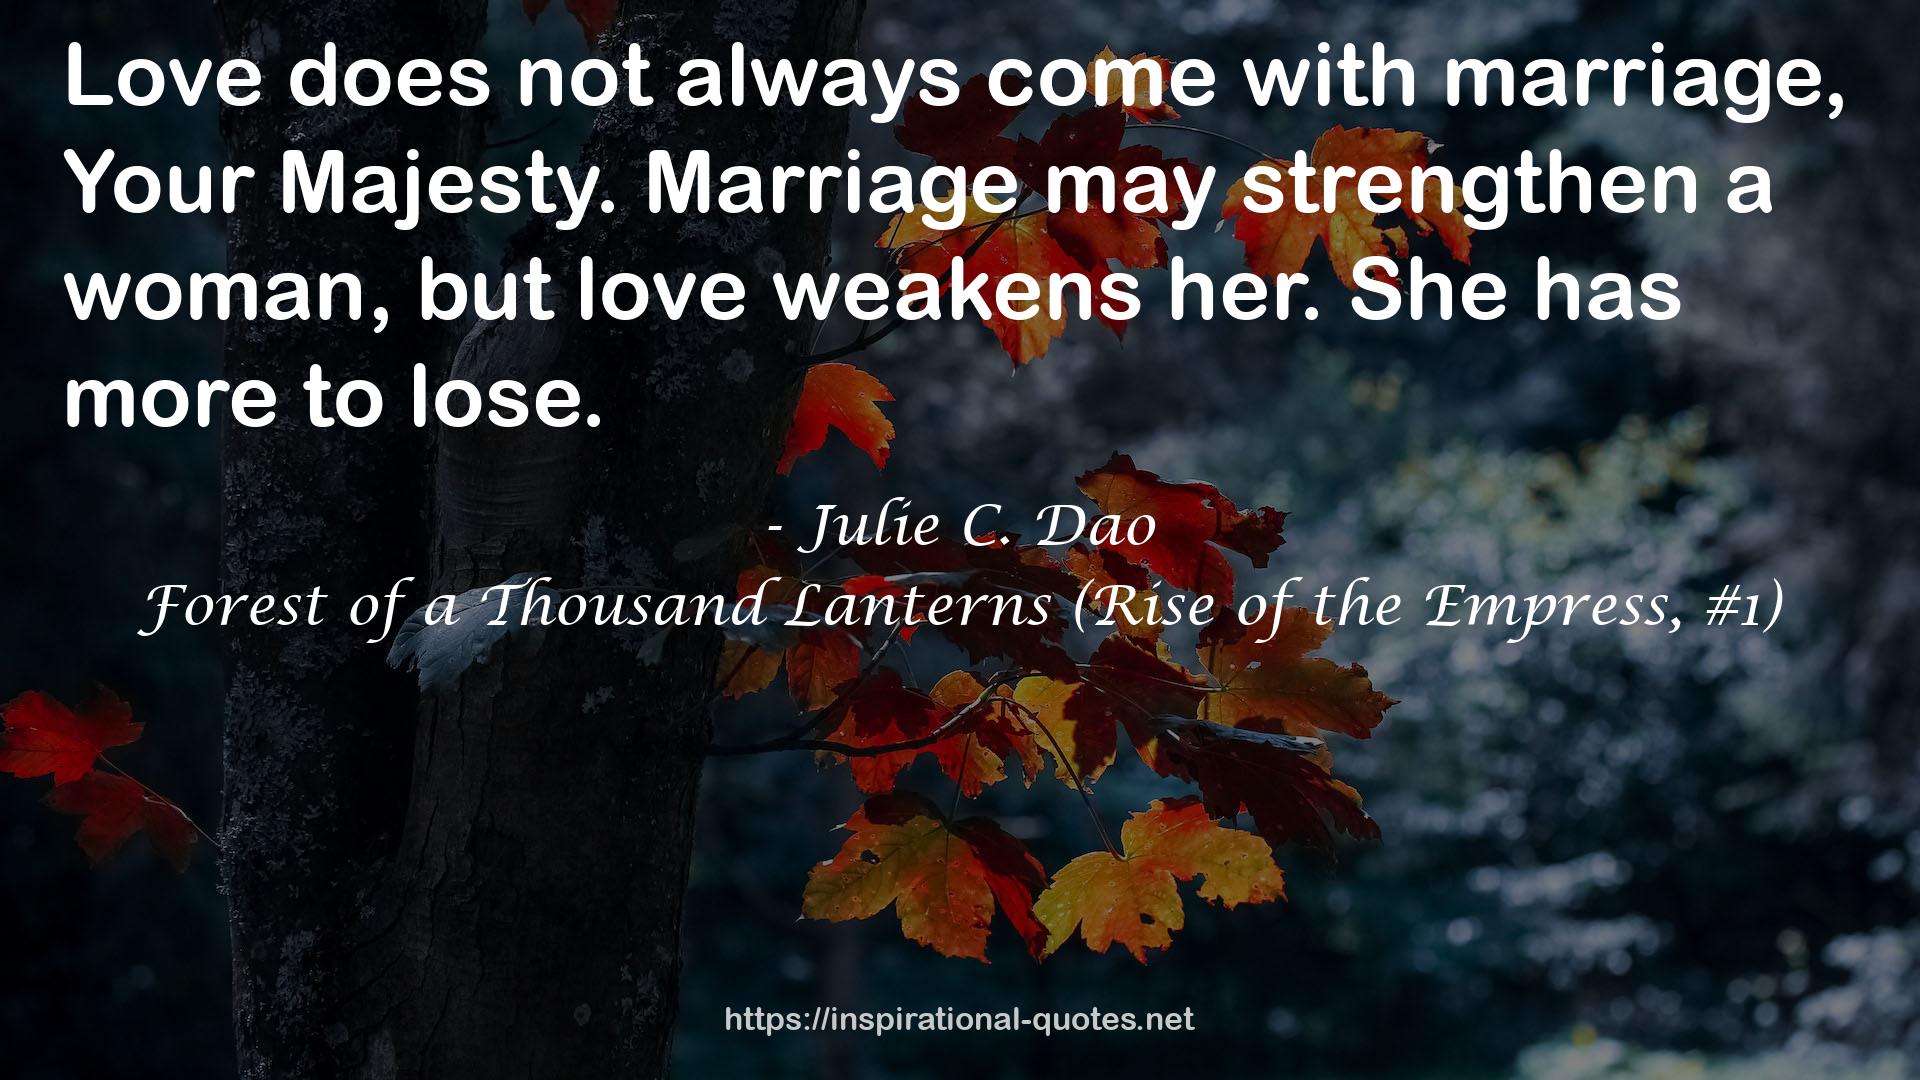 Forest of a Thousand Lanterns (Rise of the Empress, #1) QUOTES